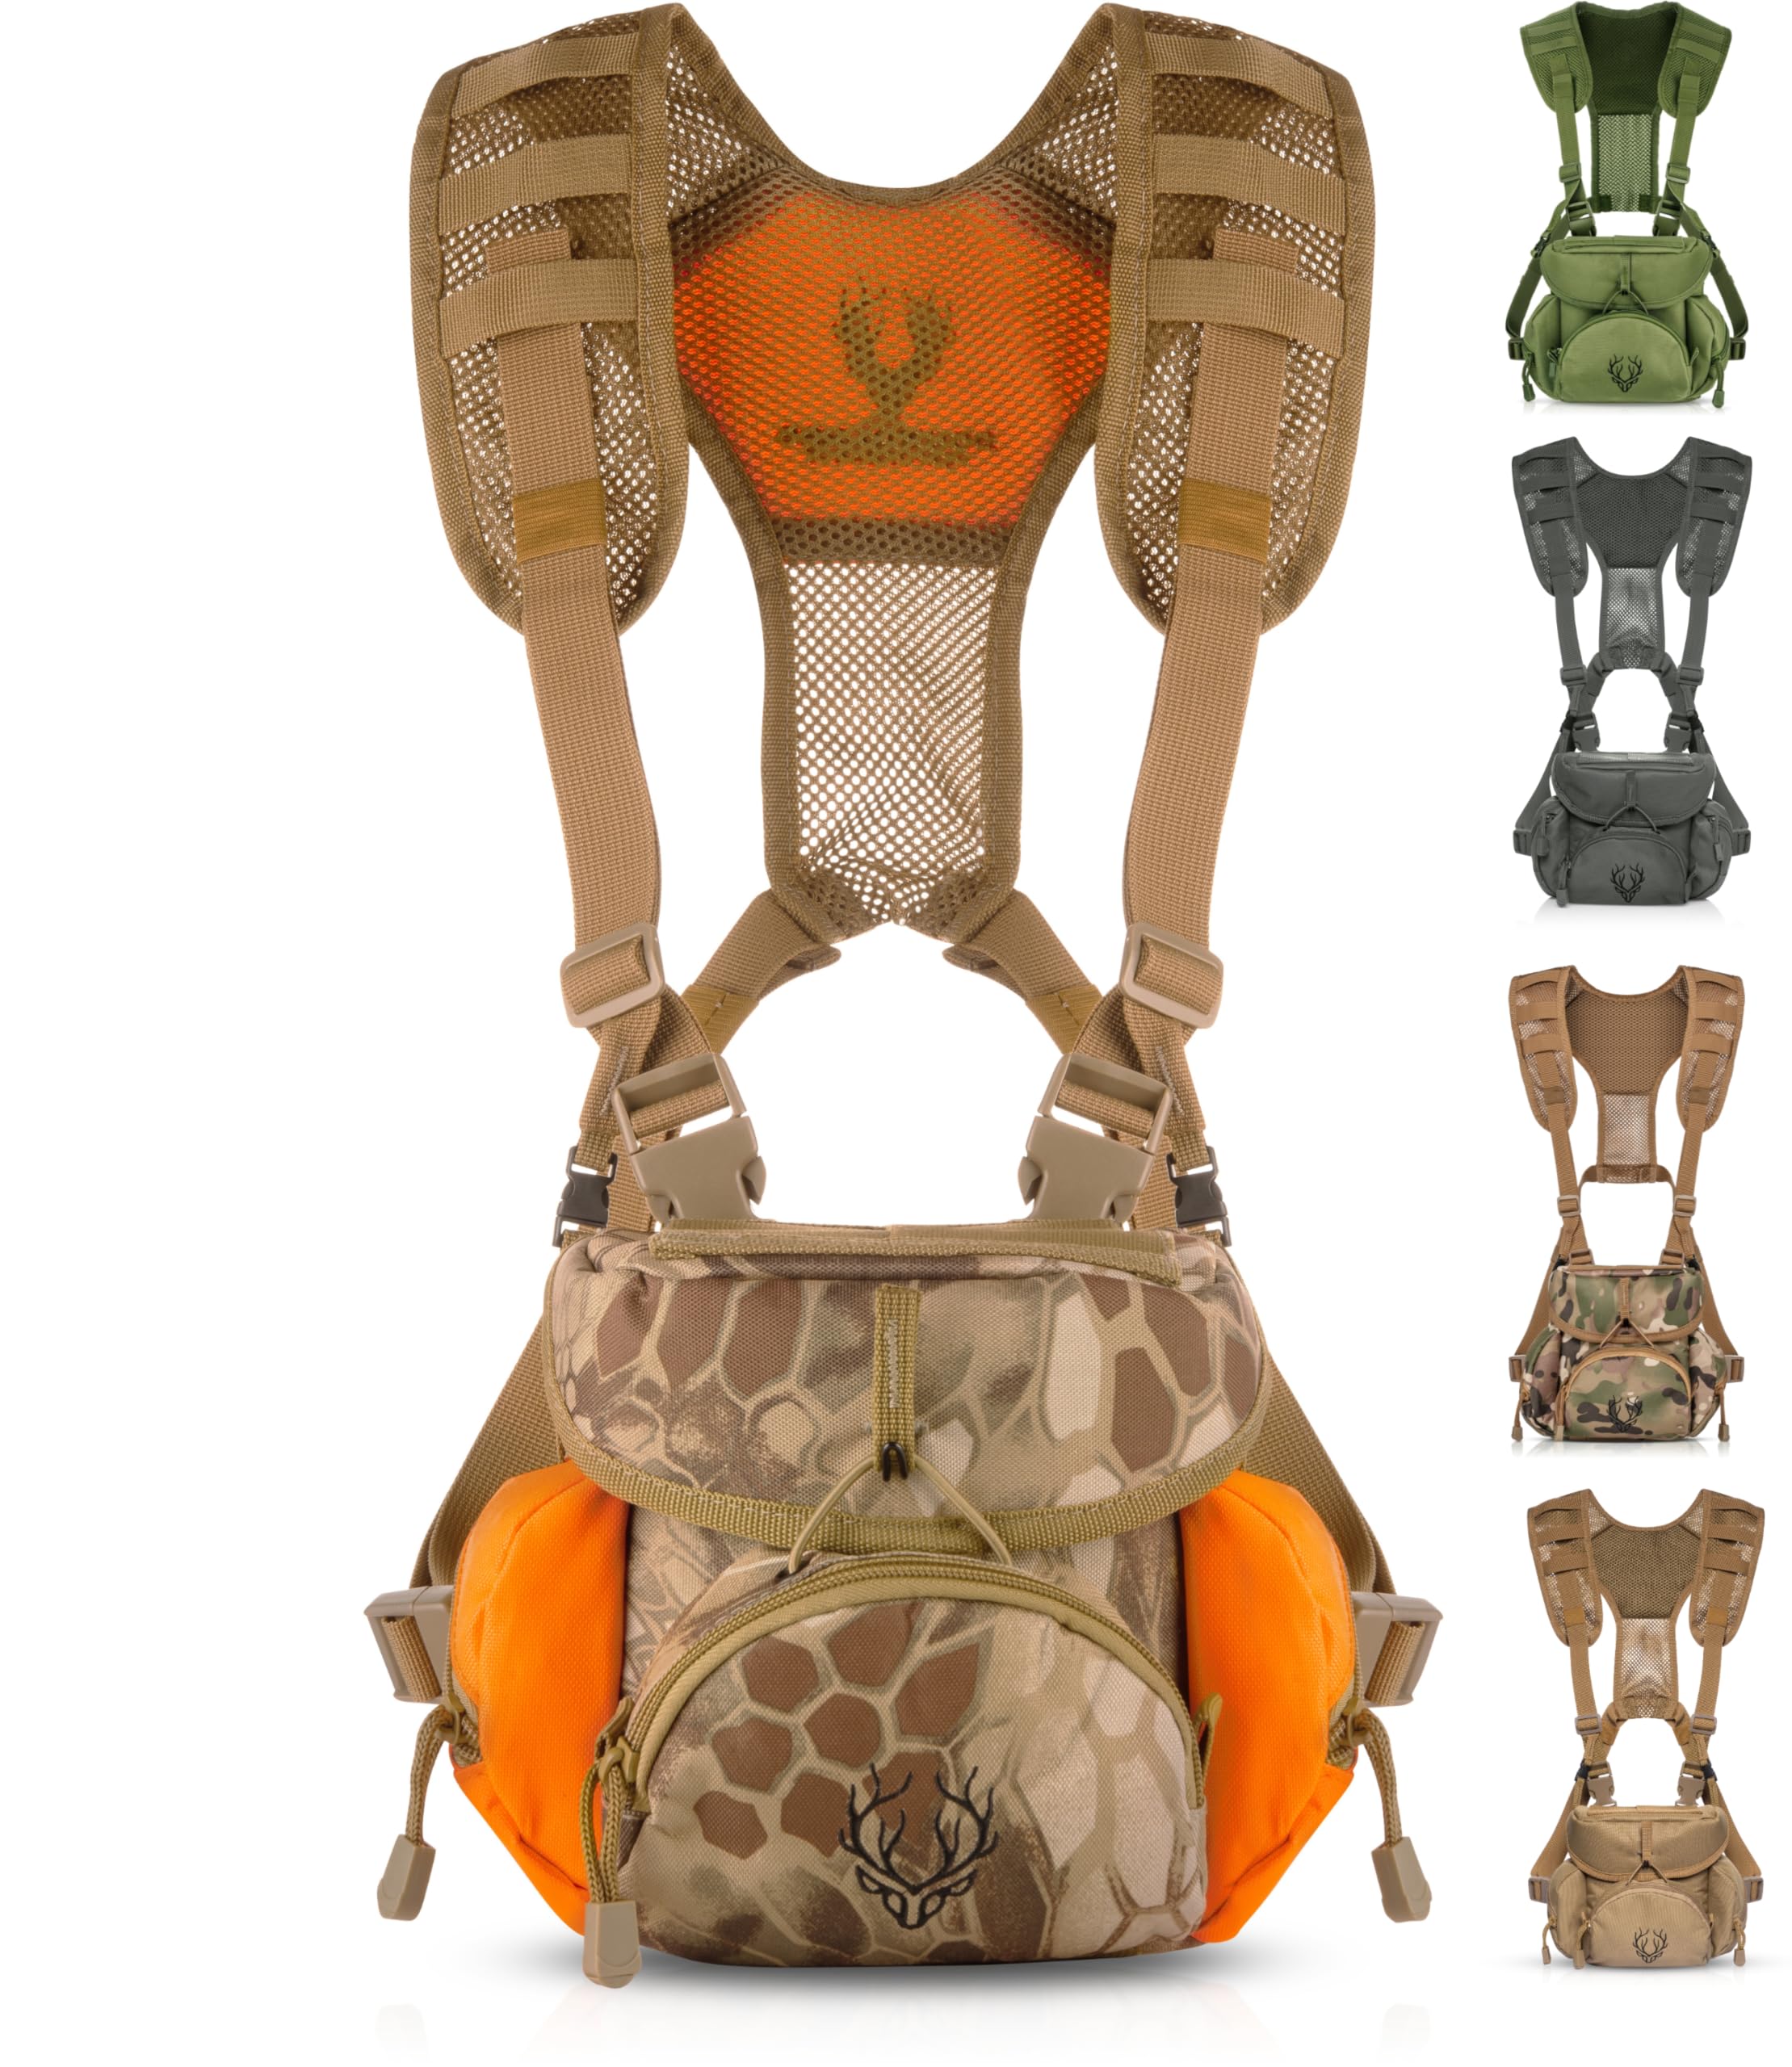 Boundless Performance Binocular Harness Chest Pack - Our Bino harness case is great for hunting, hiking, and shooting - Bino straps secure your binoculars - holds rangefinders, bullets, gear - Orange